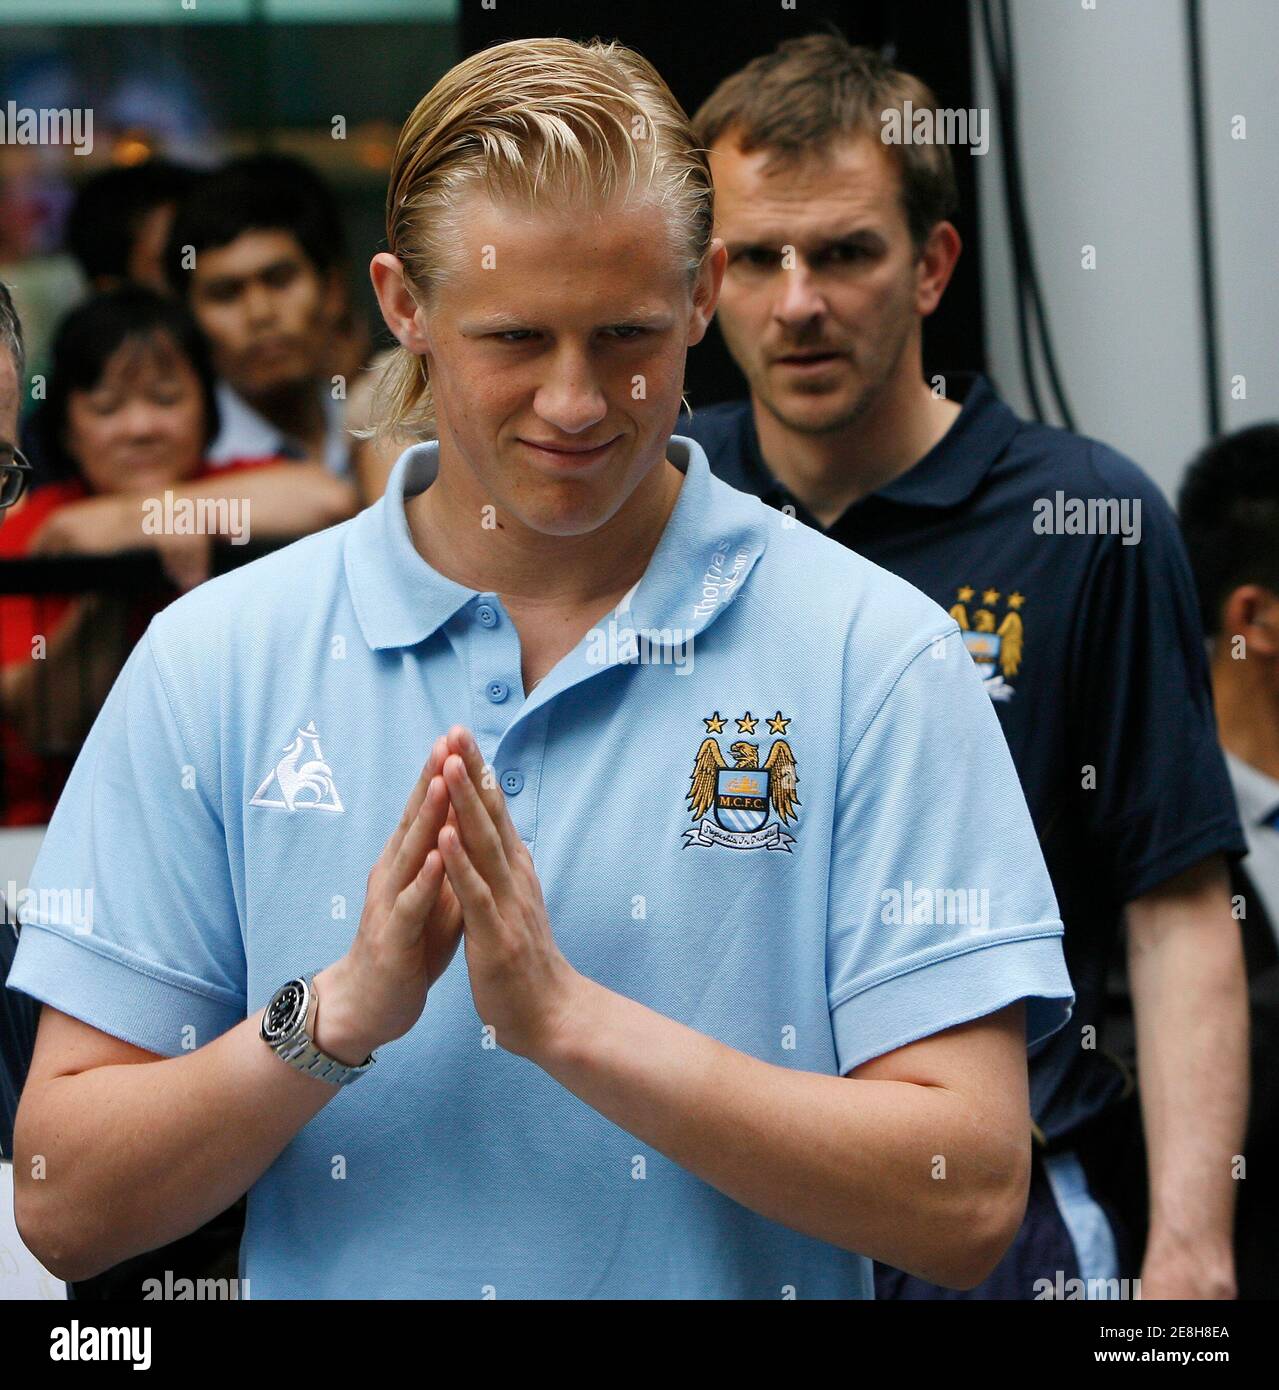 Manchester City goalkeeper Kasper Schmeichel and his teammate Dietmar Hamann attend a news conference at a shopping mall in Bangkok May 15, 2008. Manchester City will play a soccer friendly against Thailand on May 17. REUTERS/Chaiwat Subprasom (THAILAND) Stock Photo